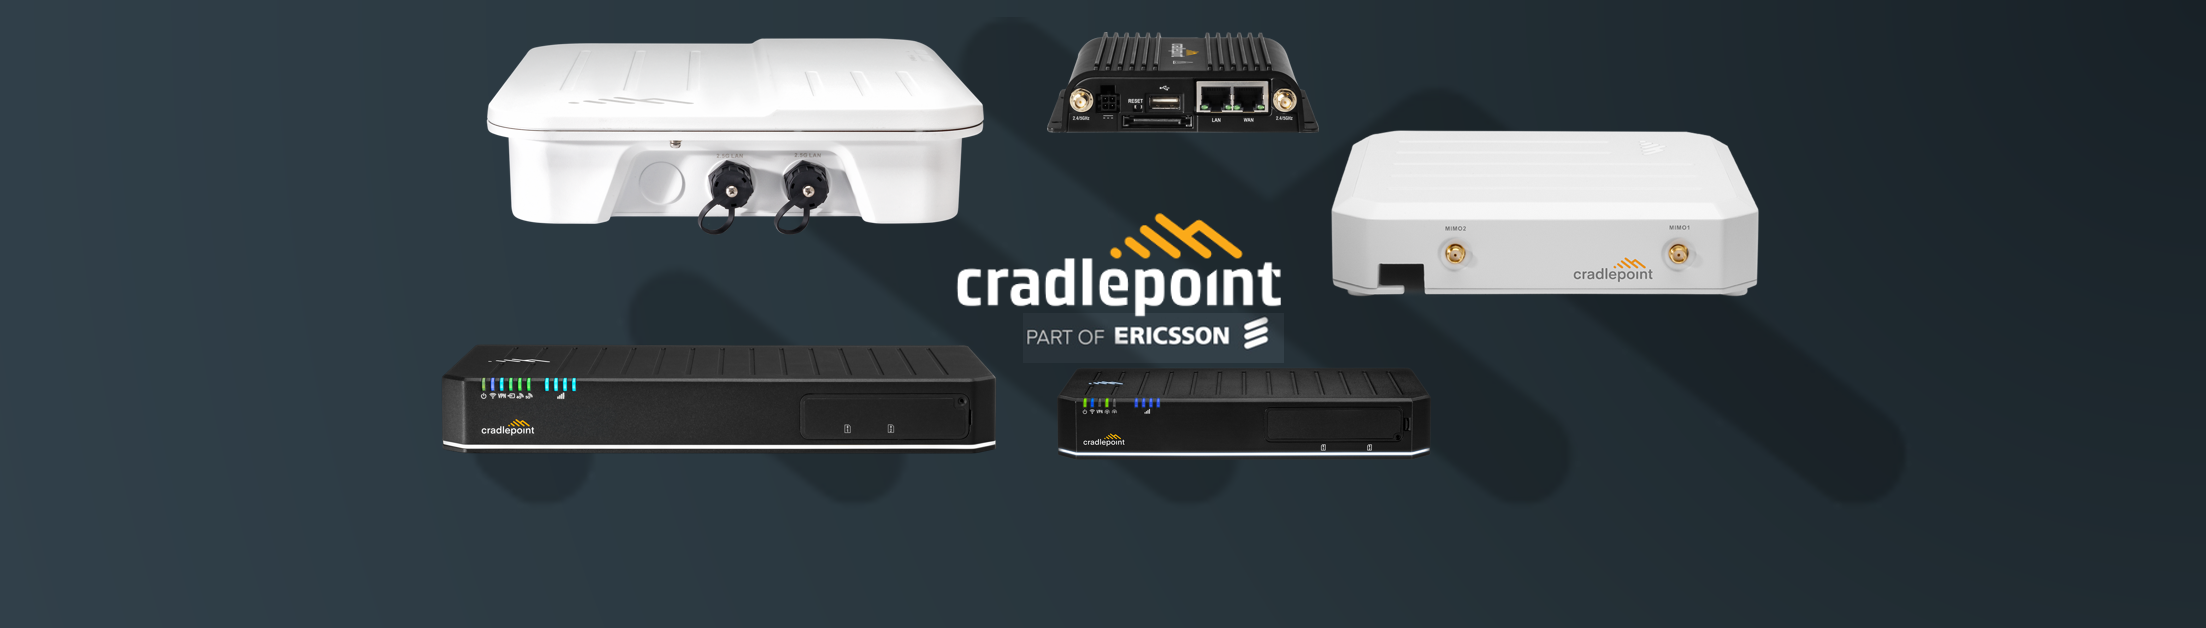 5 most popular cradlepoint routers in australia blog banner 3